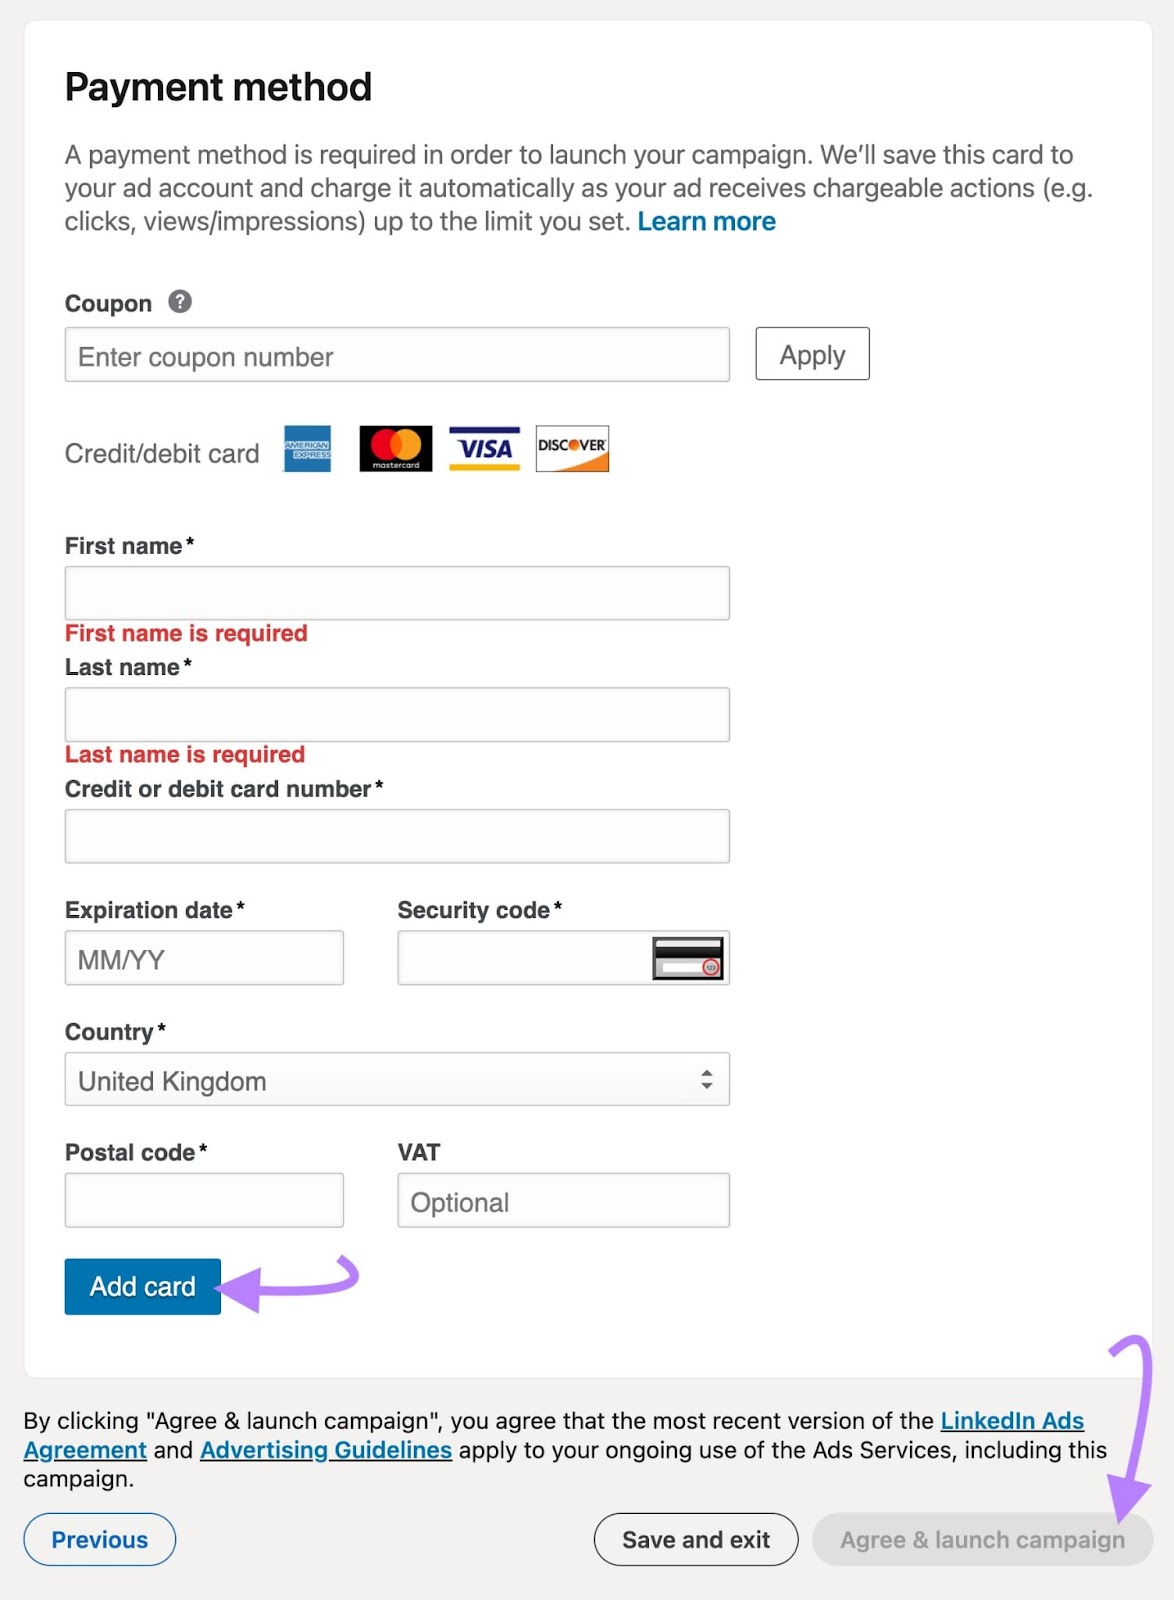 Payment screen with coupon option and card details options